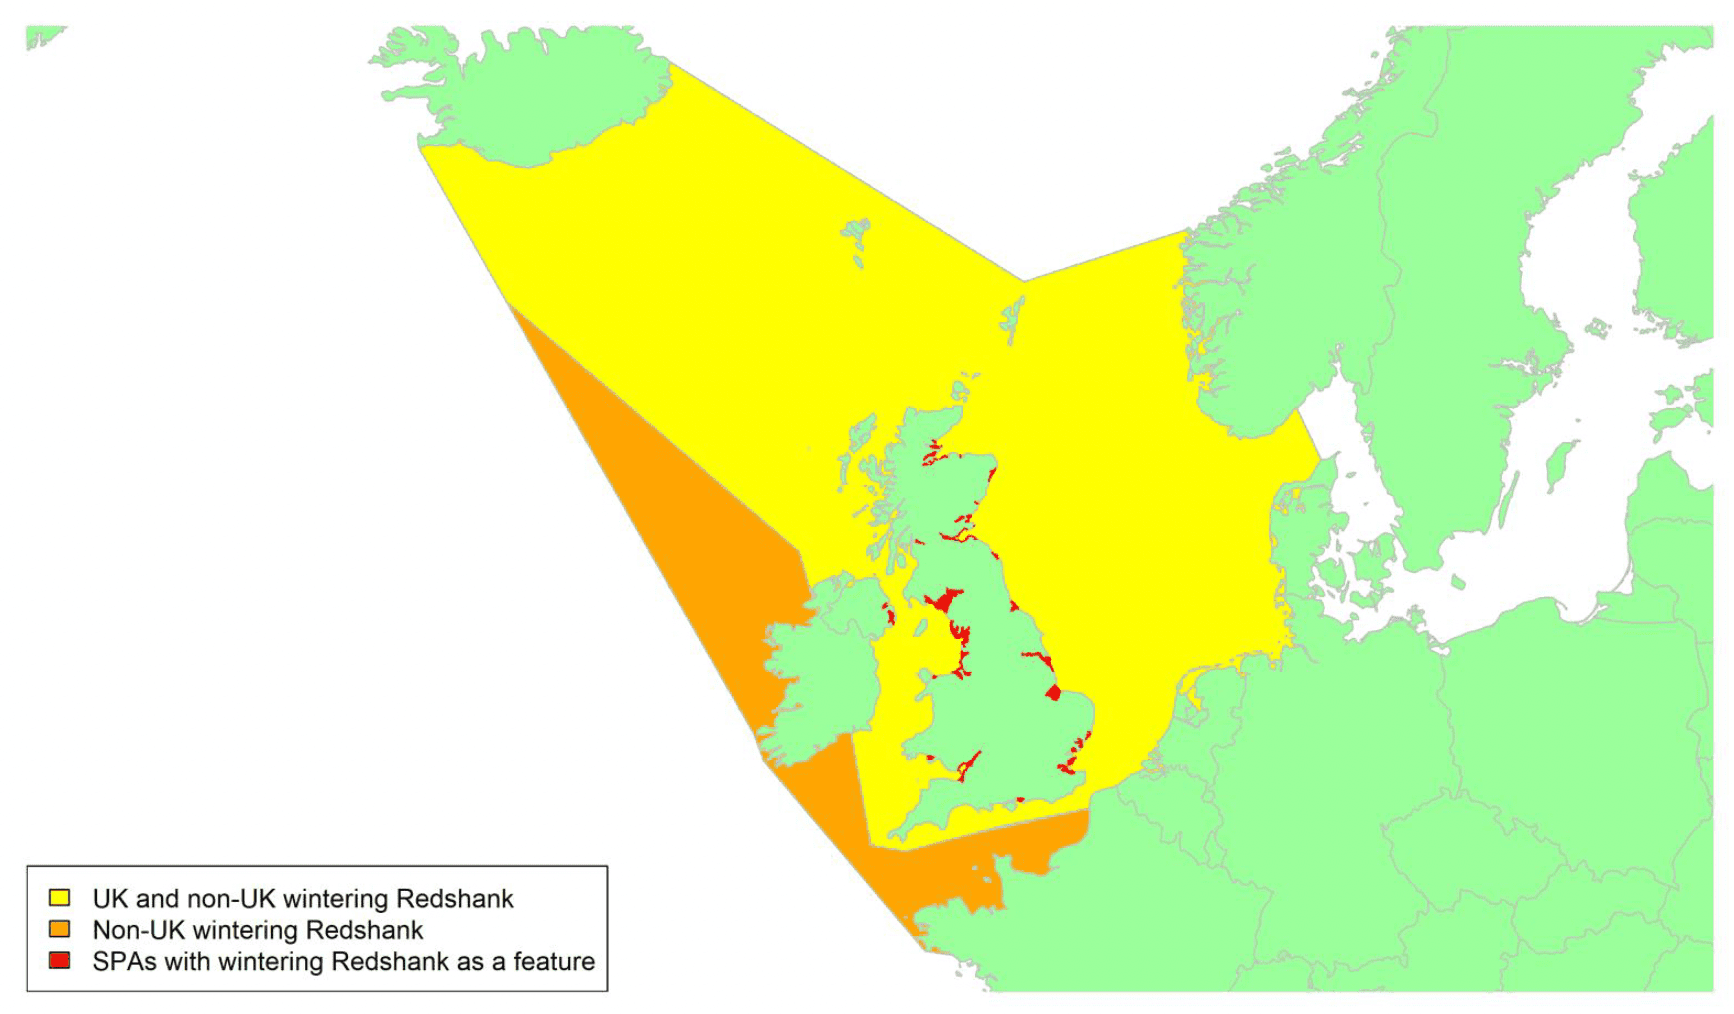 Map of North West Europe showing migratory routes and SPAs within the UK for wintering Redshank as described in the text below.